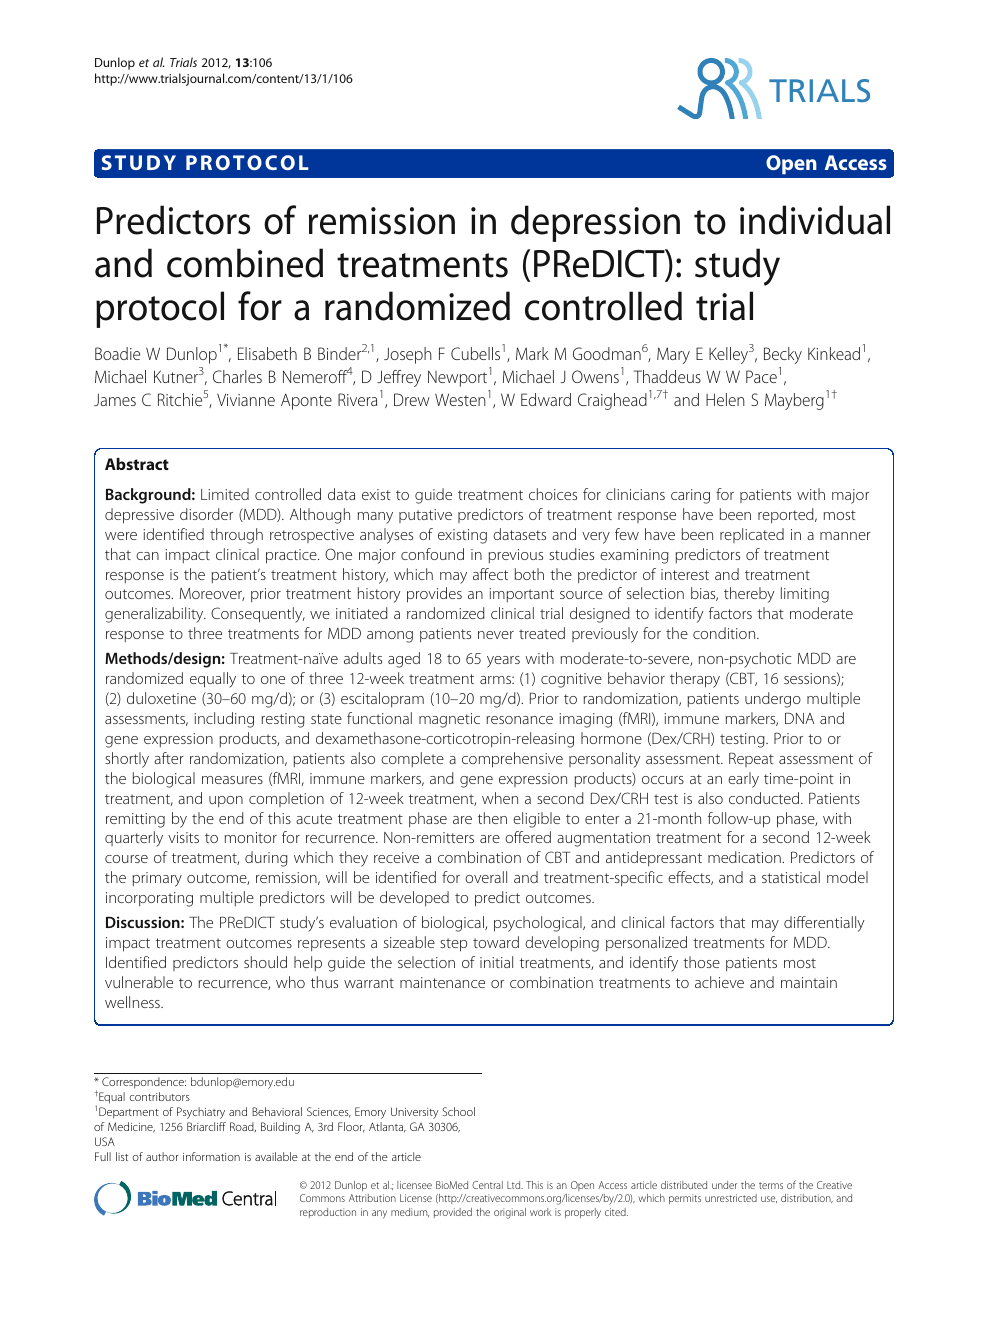 Predictors Of Remission In Depression To Individual And Combined